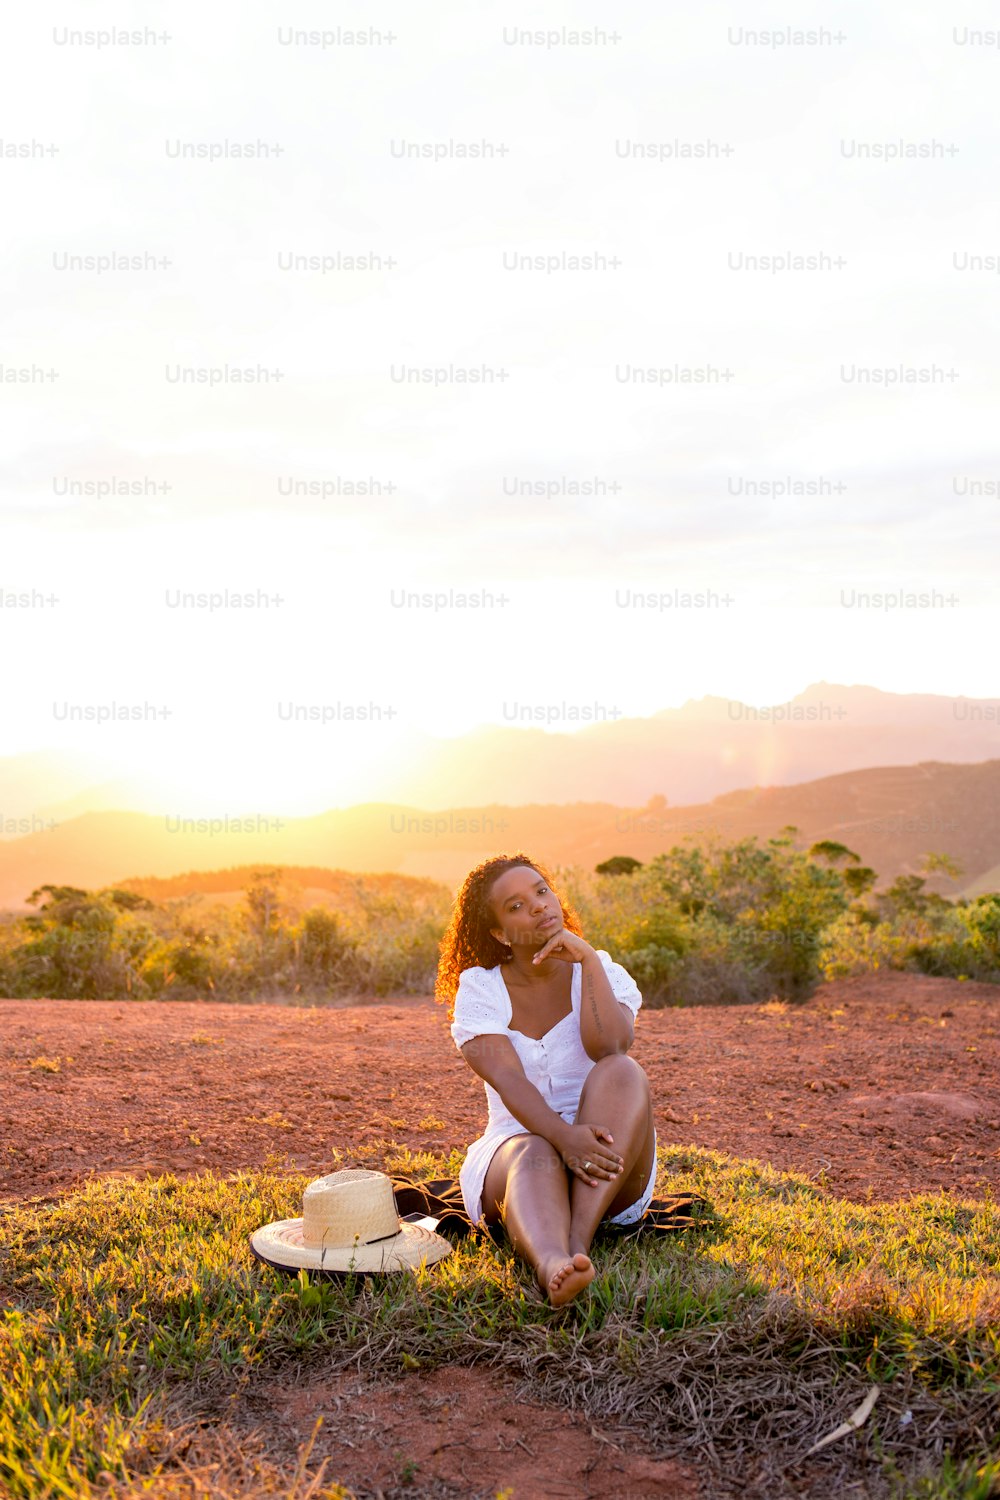 Young woman barefoot and sitting on the ground, enjoying nature, with the sunset in the background.